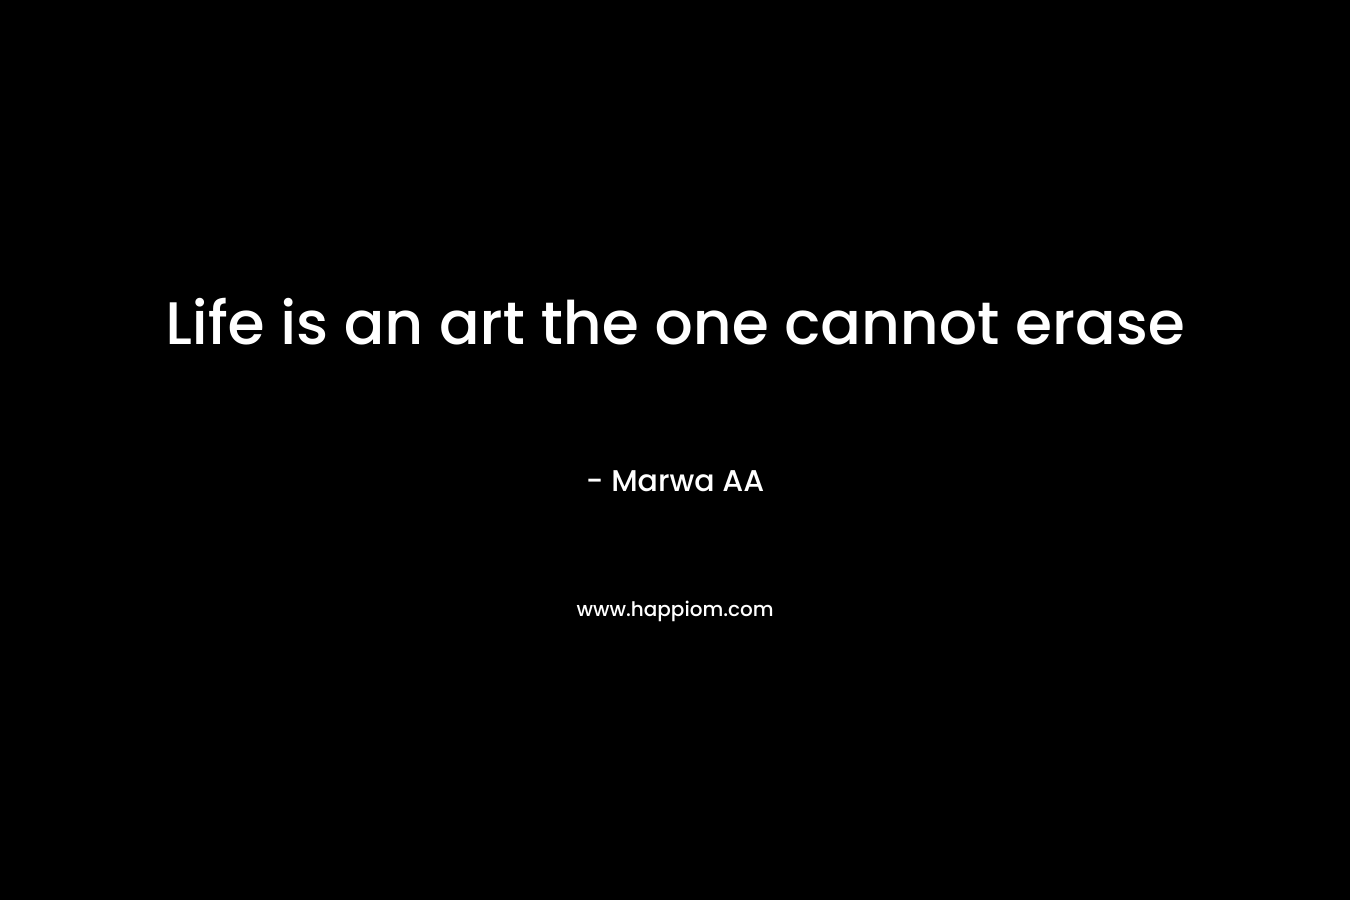 Life is an art the one cannot erase